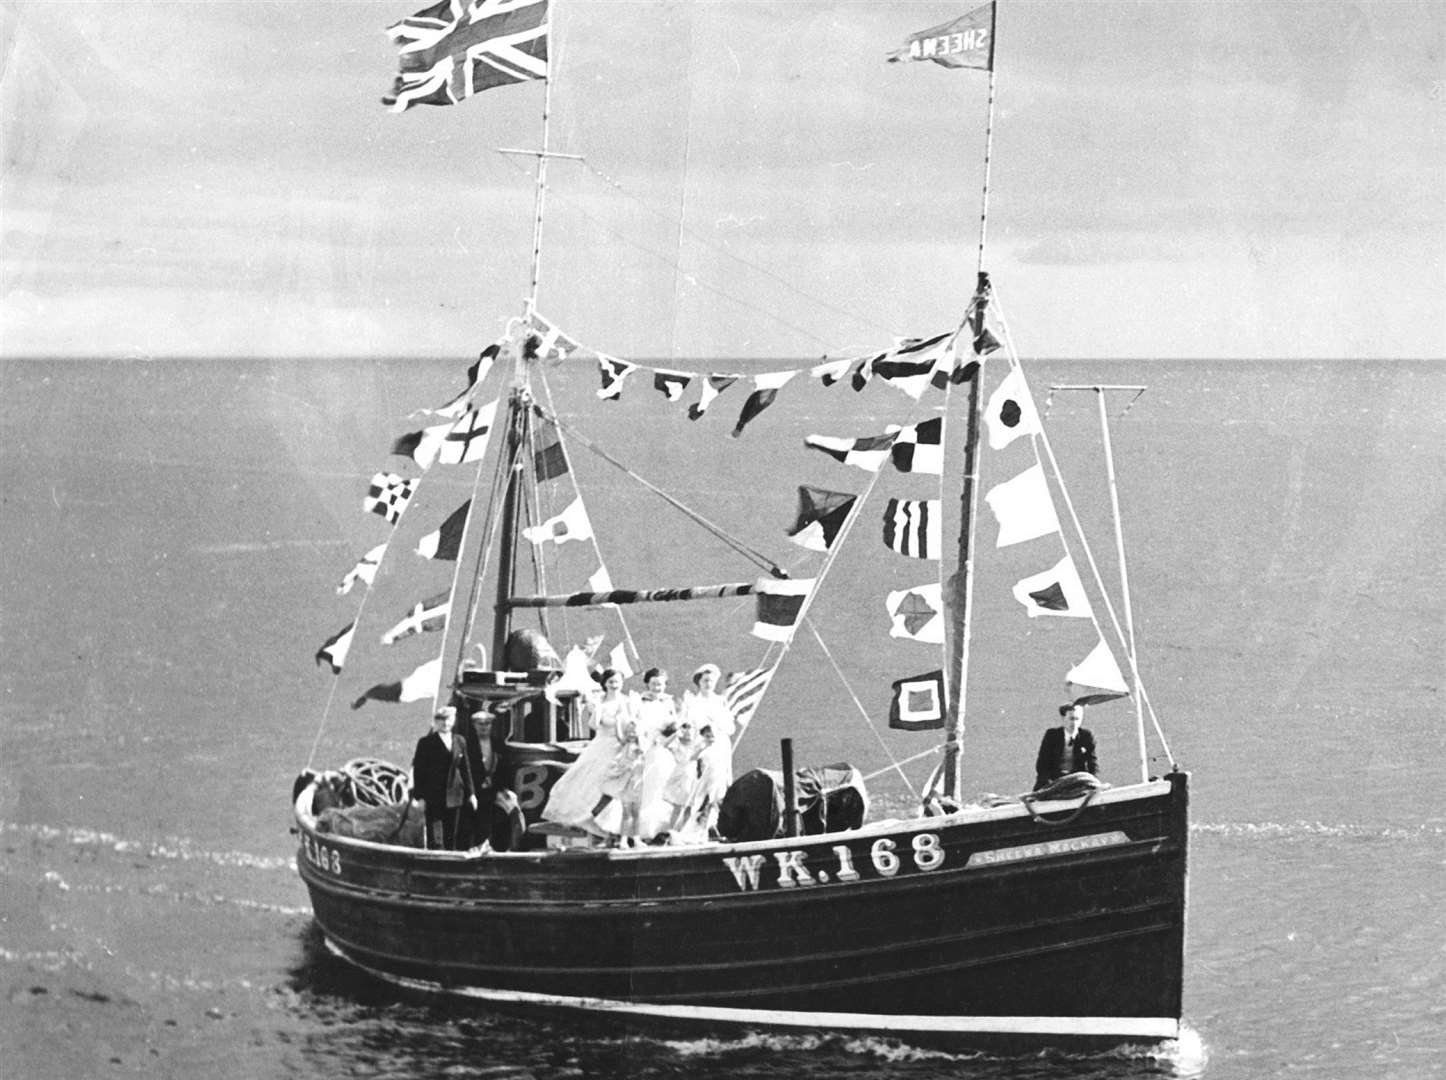 The Wick-registered boat Sheena Mackay entering Helmsdale harbour during the 1950s, with the Seine Queen and her attendants on board.